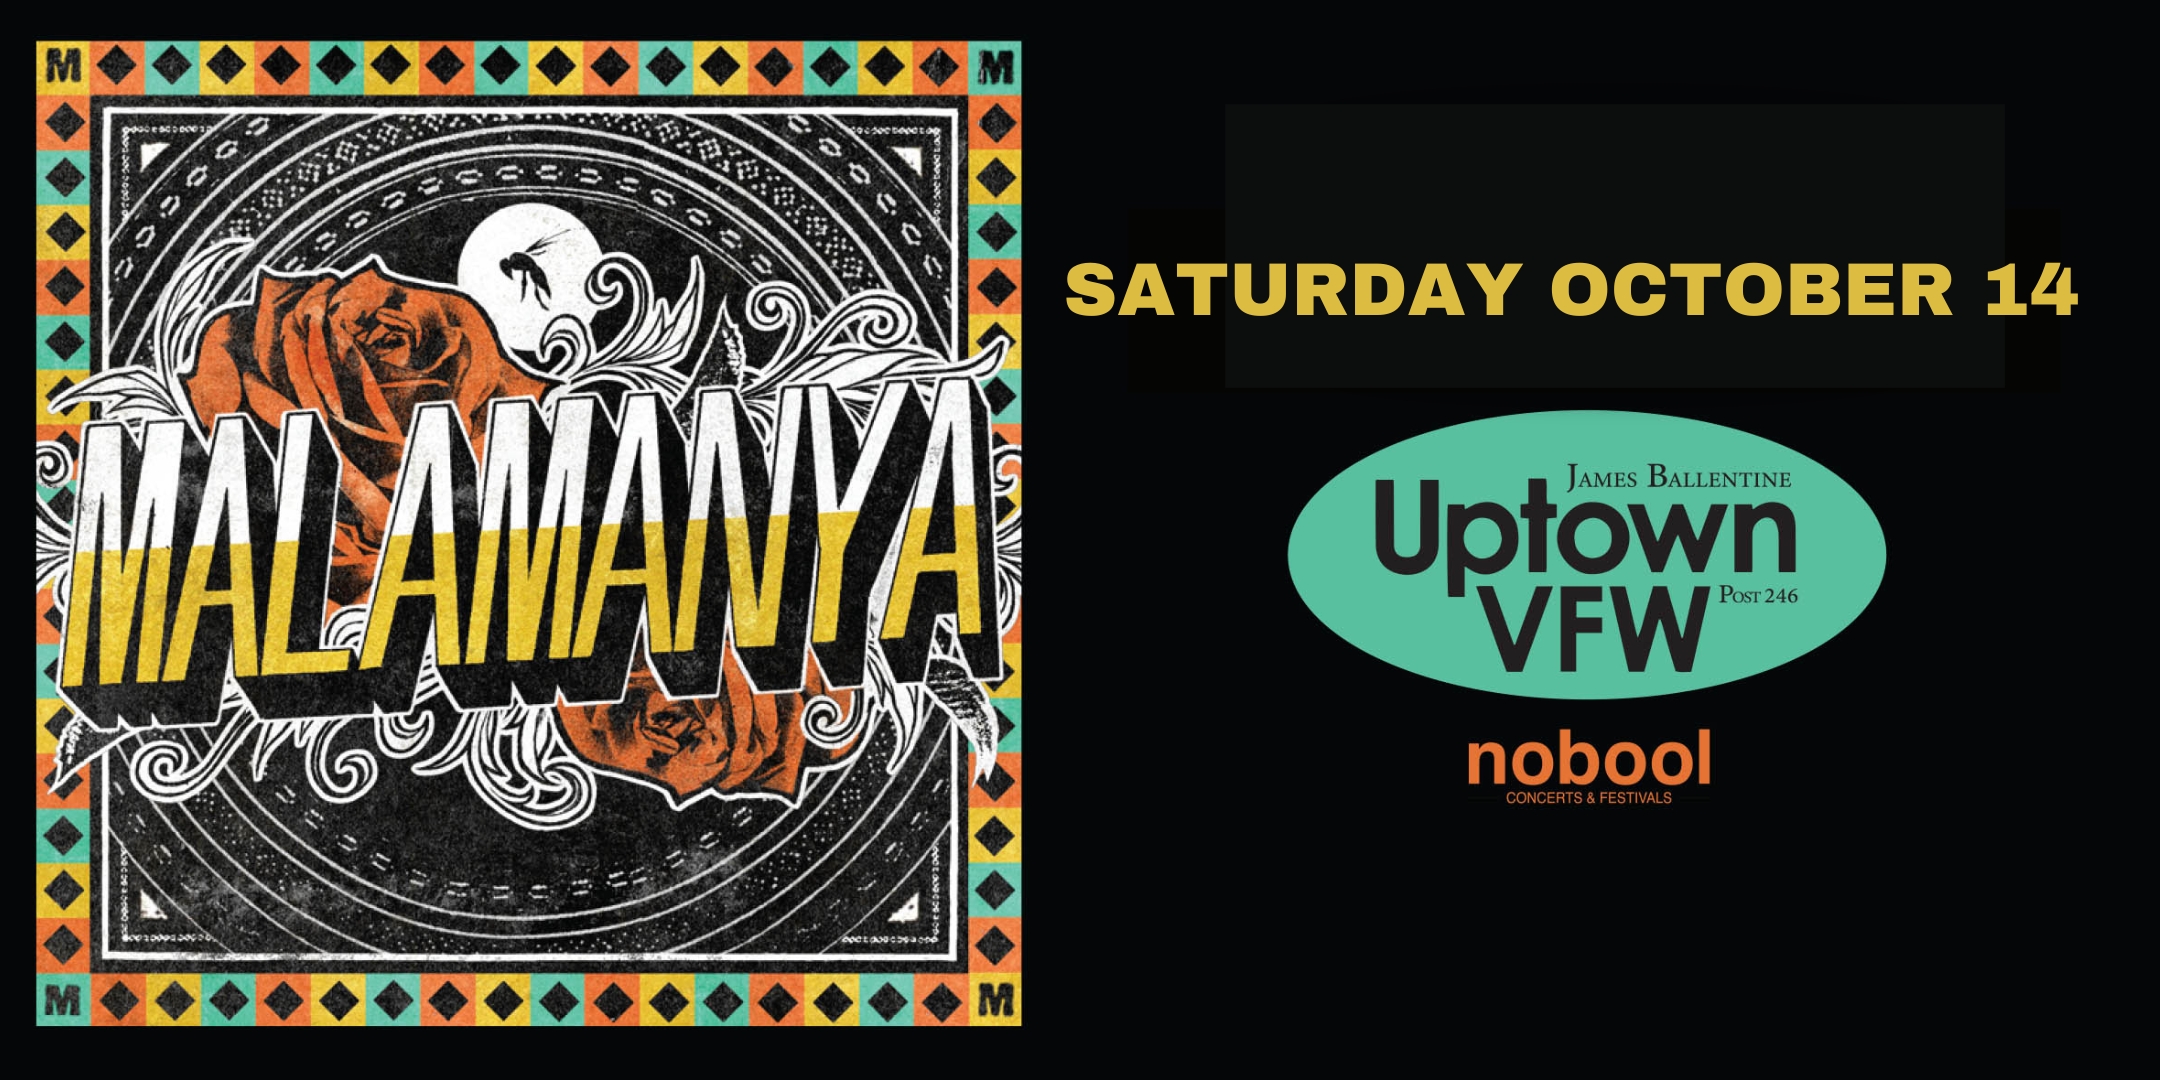 Malamanya Saturday, October 14 James Ballentine "Uptown" VFW Post 246 Doors 9:00pm :: Music 9:00pm :: 21+ GA $15 ADV / $20 DOS NO REFUNDS Tickets On-Sale Now